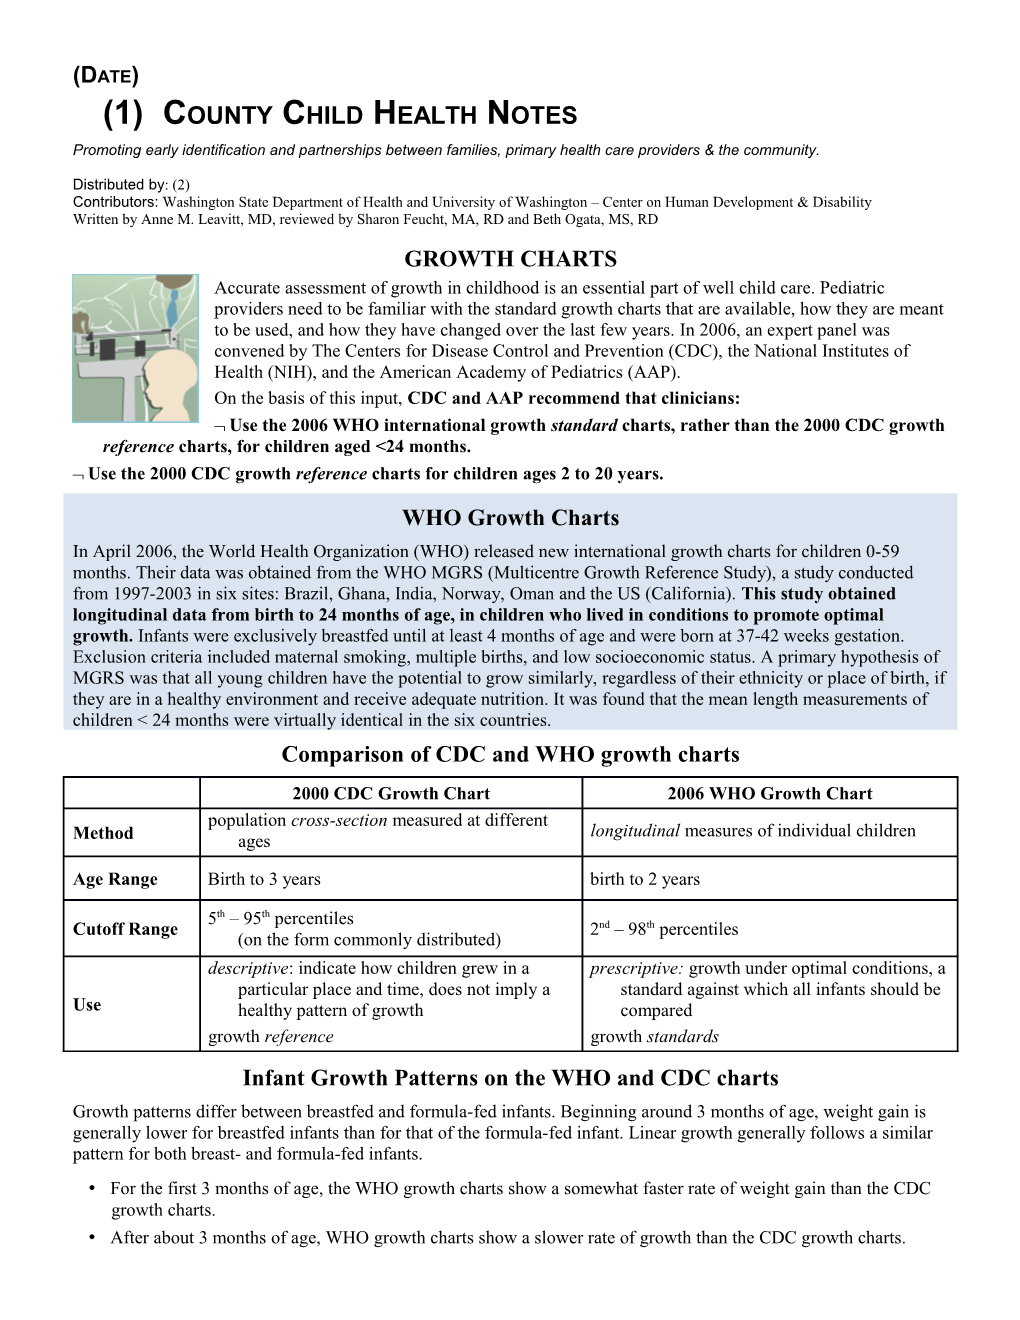 (1) County Child Health Notes s4